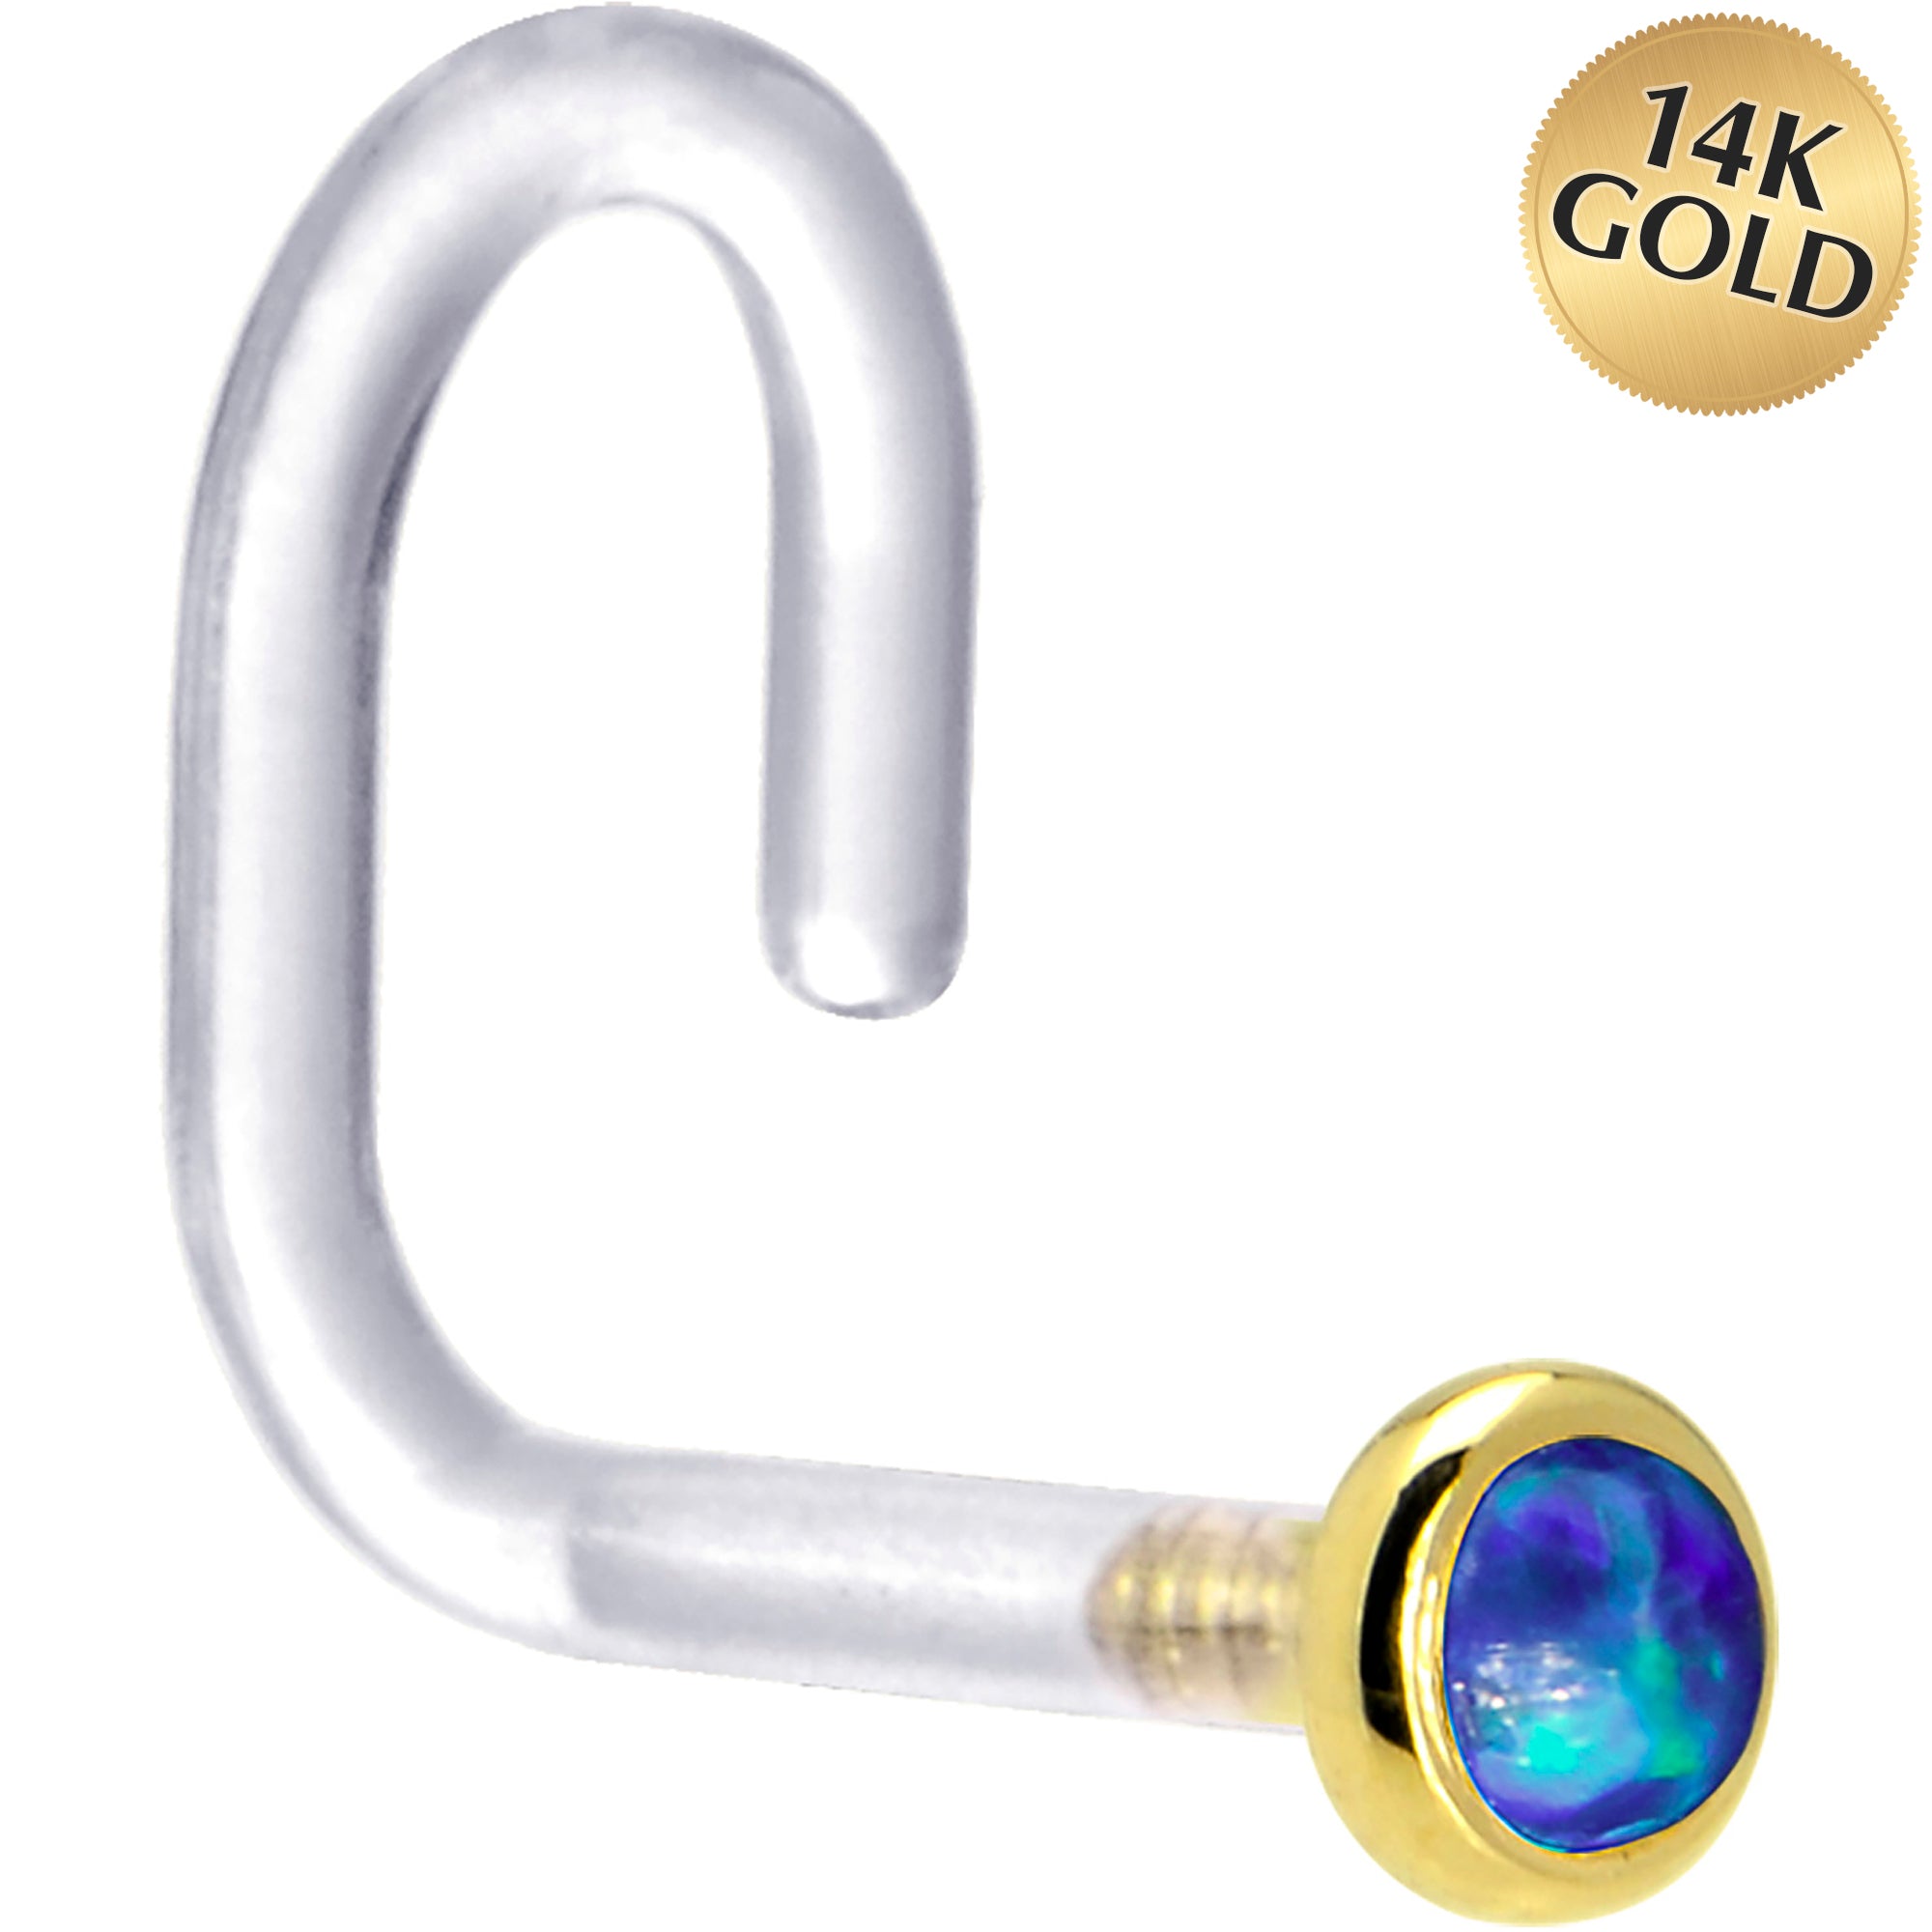 18 Gauge 1/4 Yellow Gold 2mm Dark Blue Synthetic Opal Bioplast Nose Ring